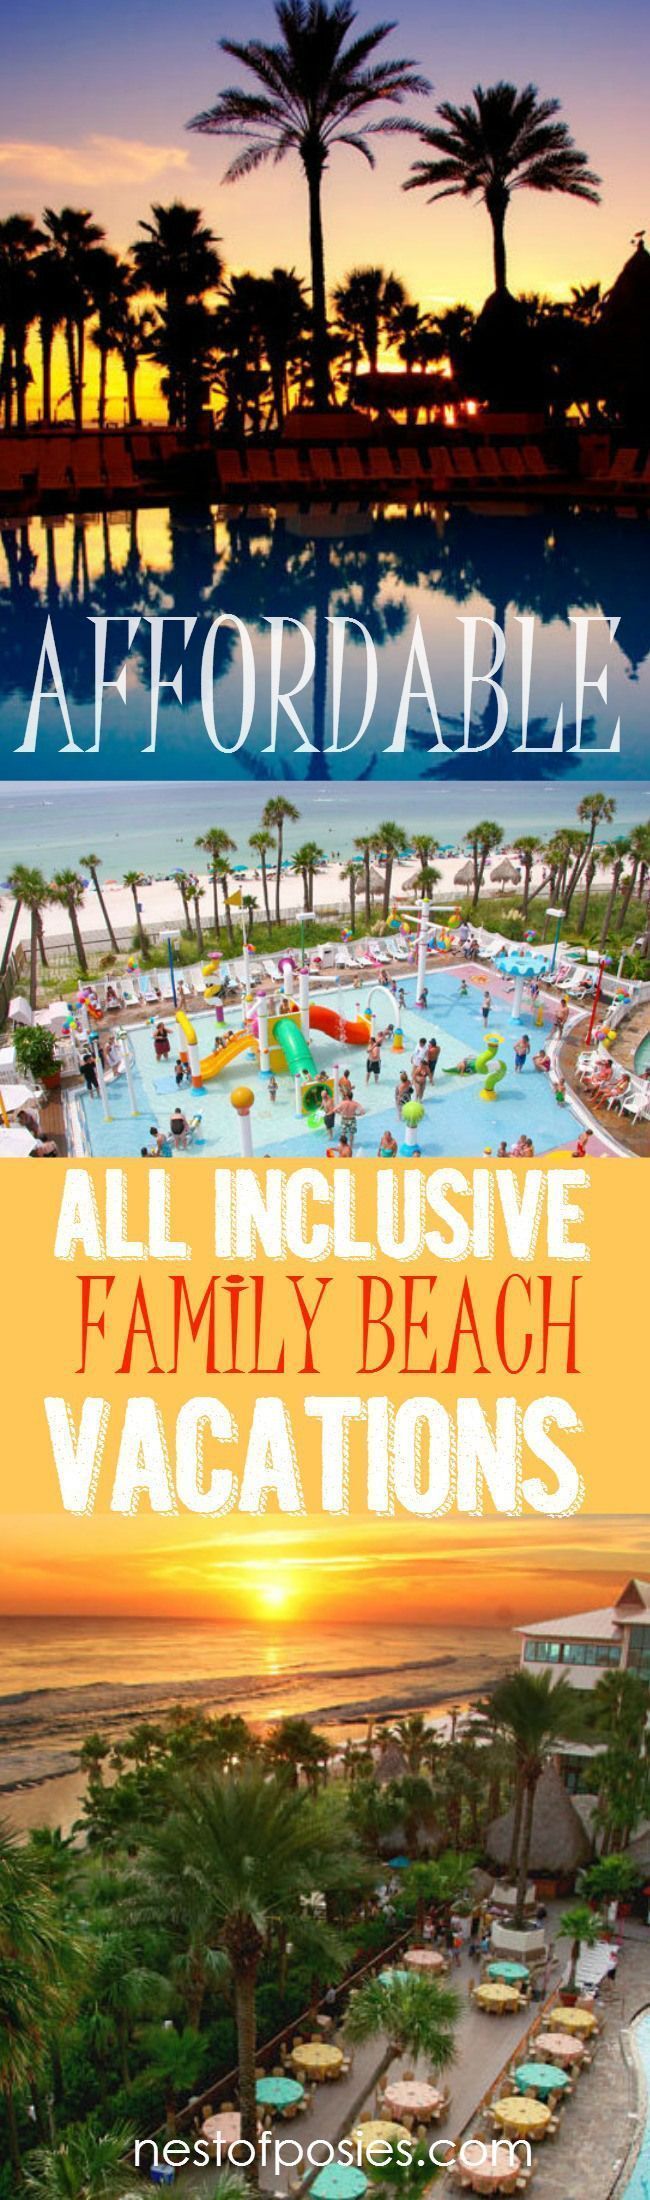 Affordable vacations for the entire family exactly that